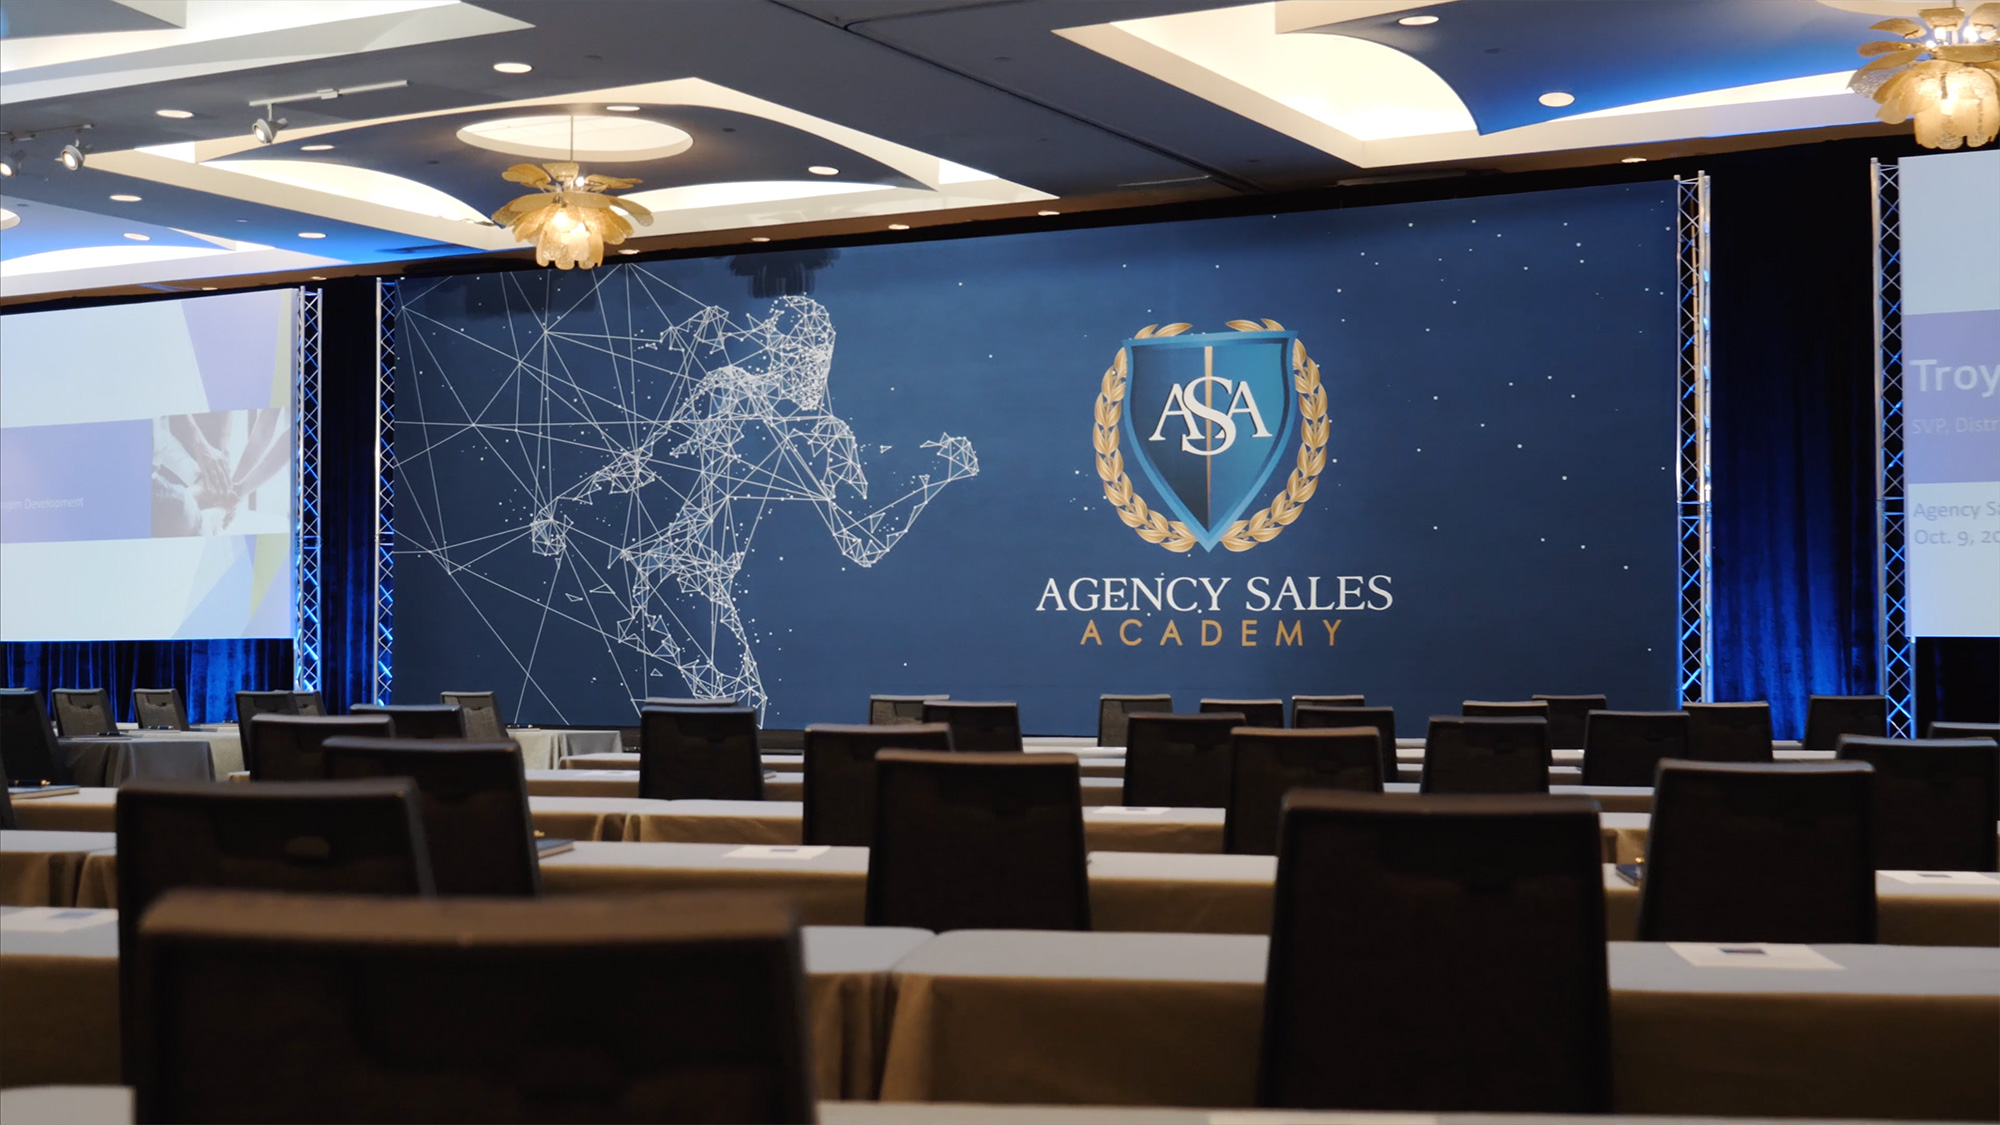 Agency Sales Academy Business Growth